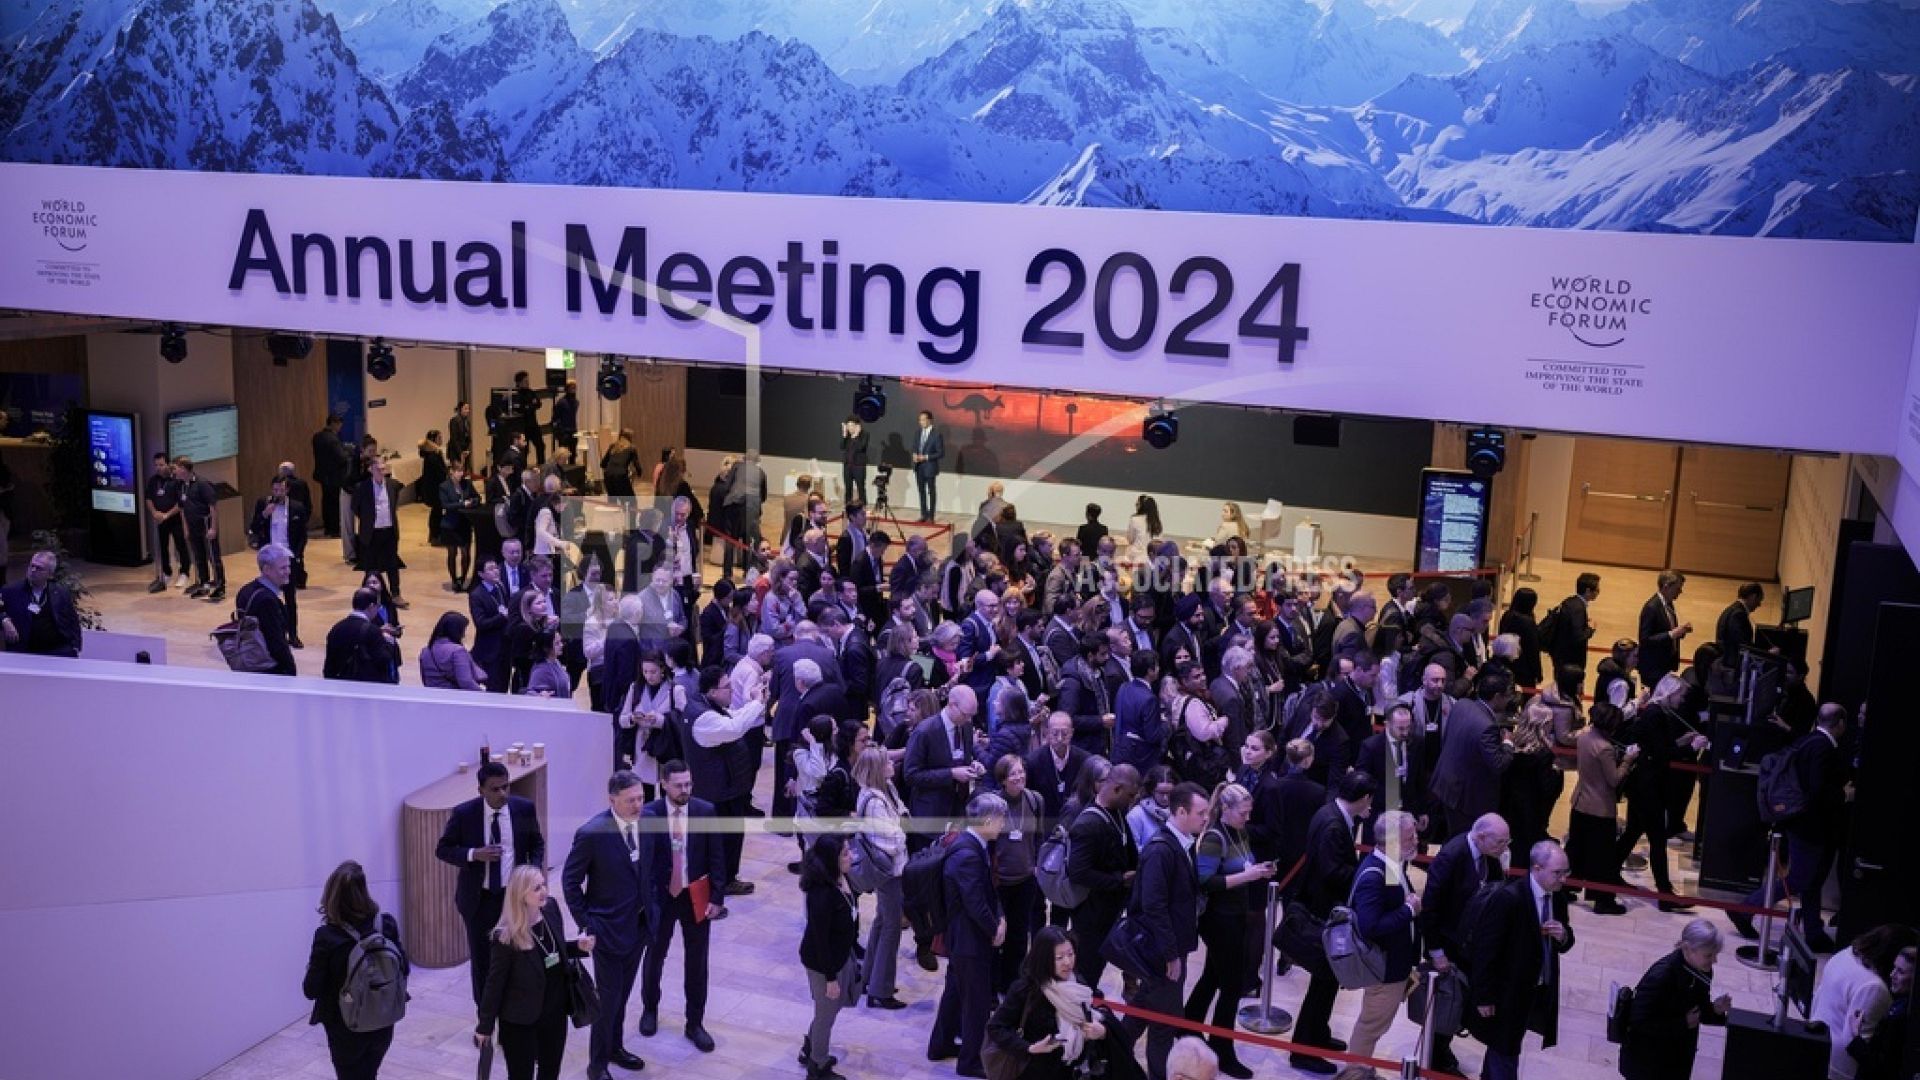 A positive role for AI? Takeaways from the 2024 World Economic Forum in